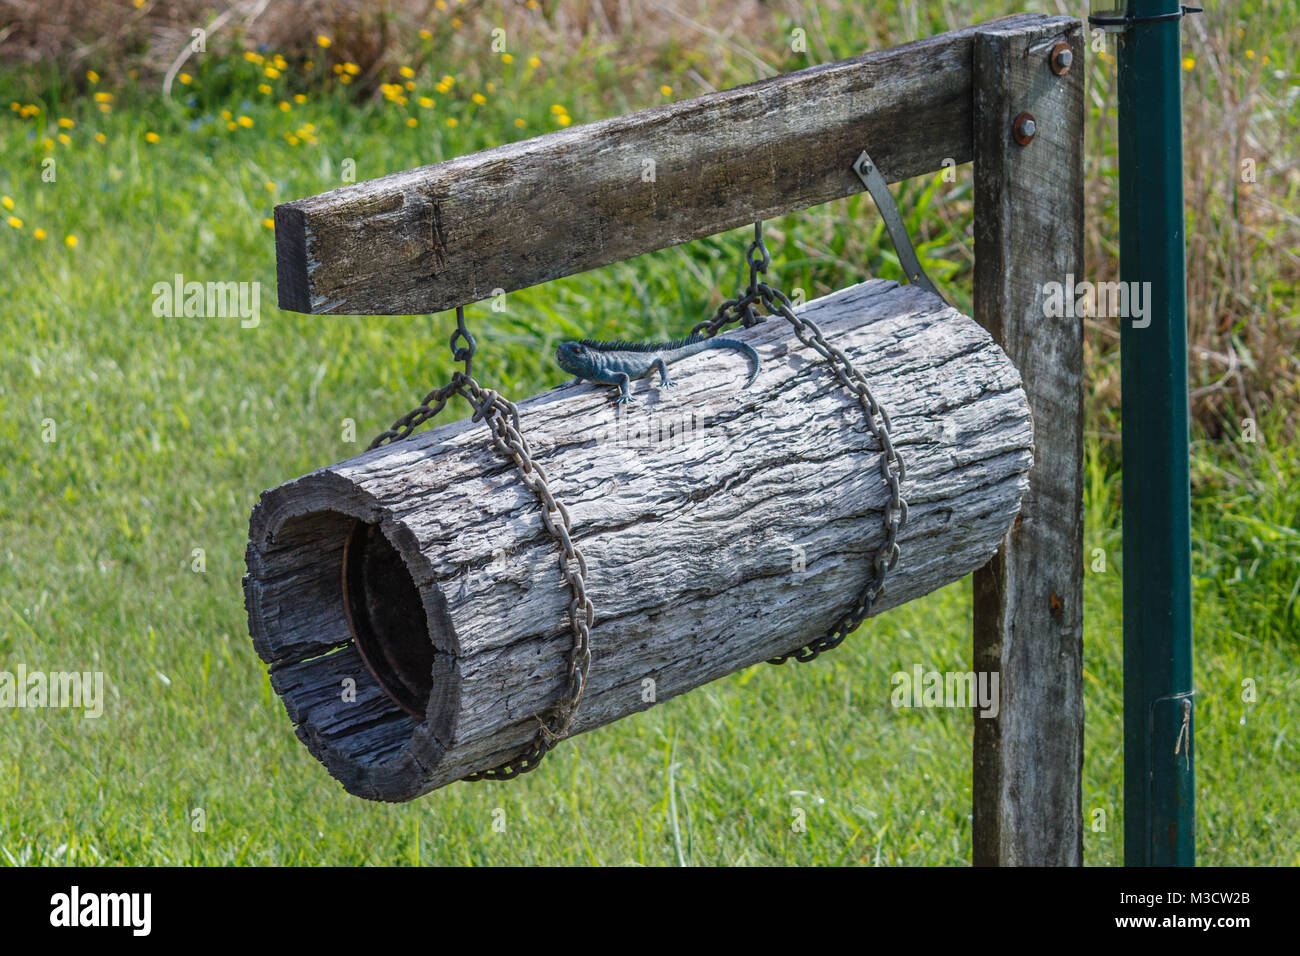 Australian countryside. Mailbox in a shape of a log with toy lizard sitting on it. Sunshine coast, Queensland, Australia Stock Photo